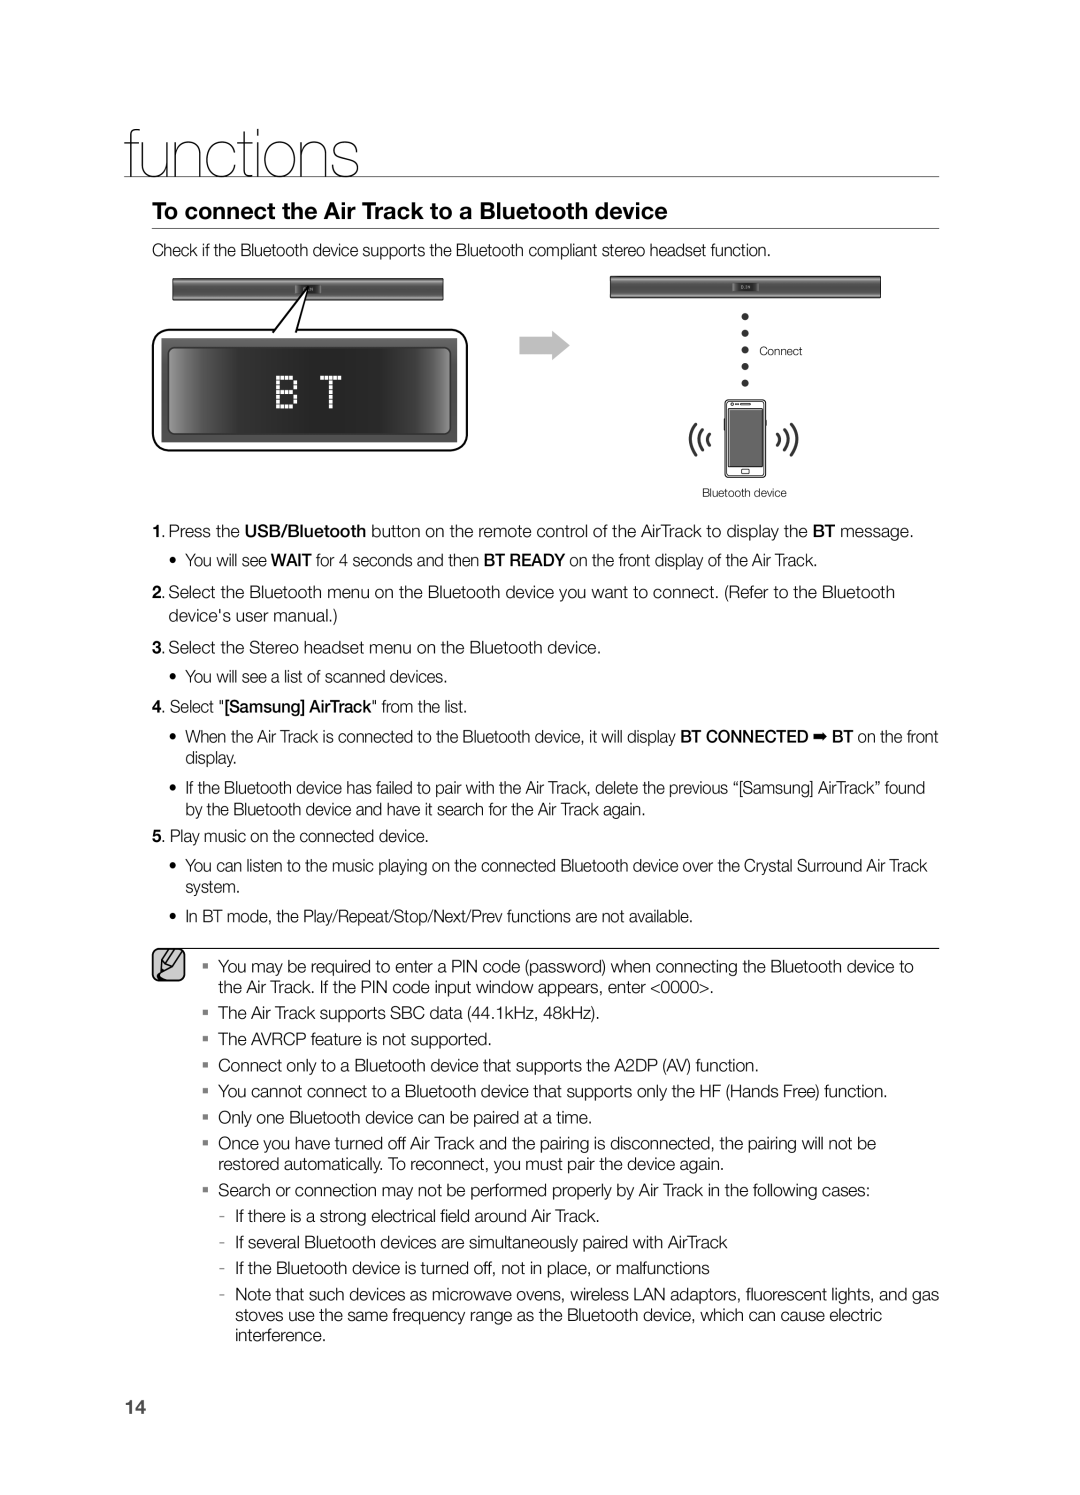 Samsung HW-F355, HWF355ZA user manual To connect the Air Track to a Bluetooth device, functions 